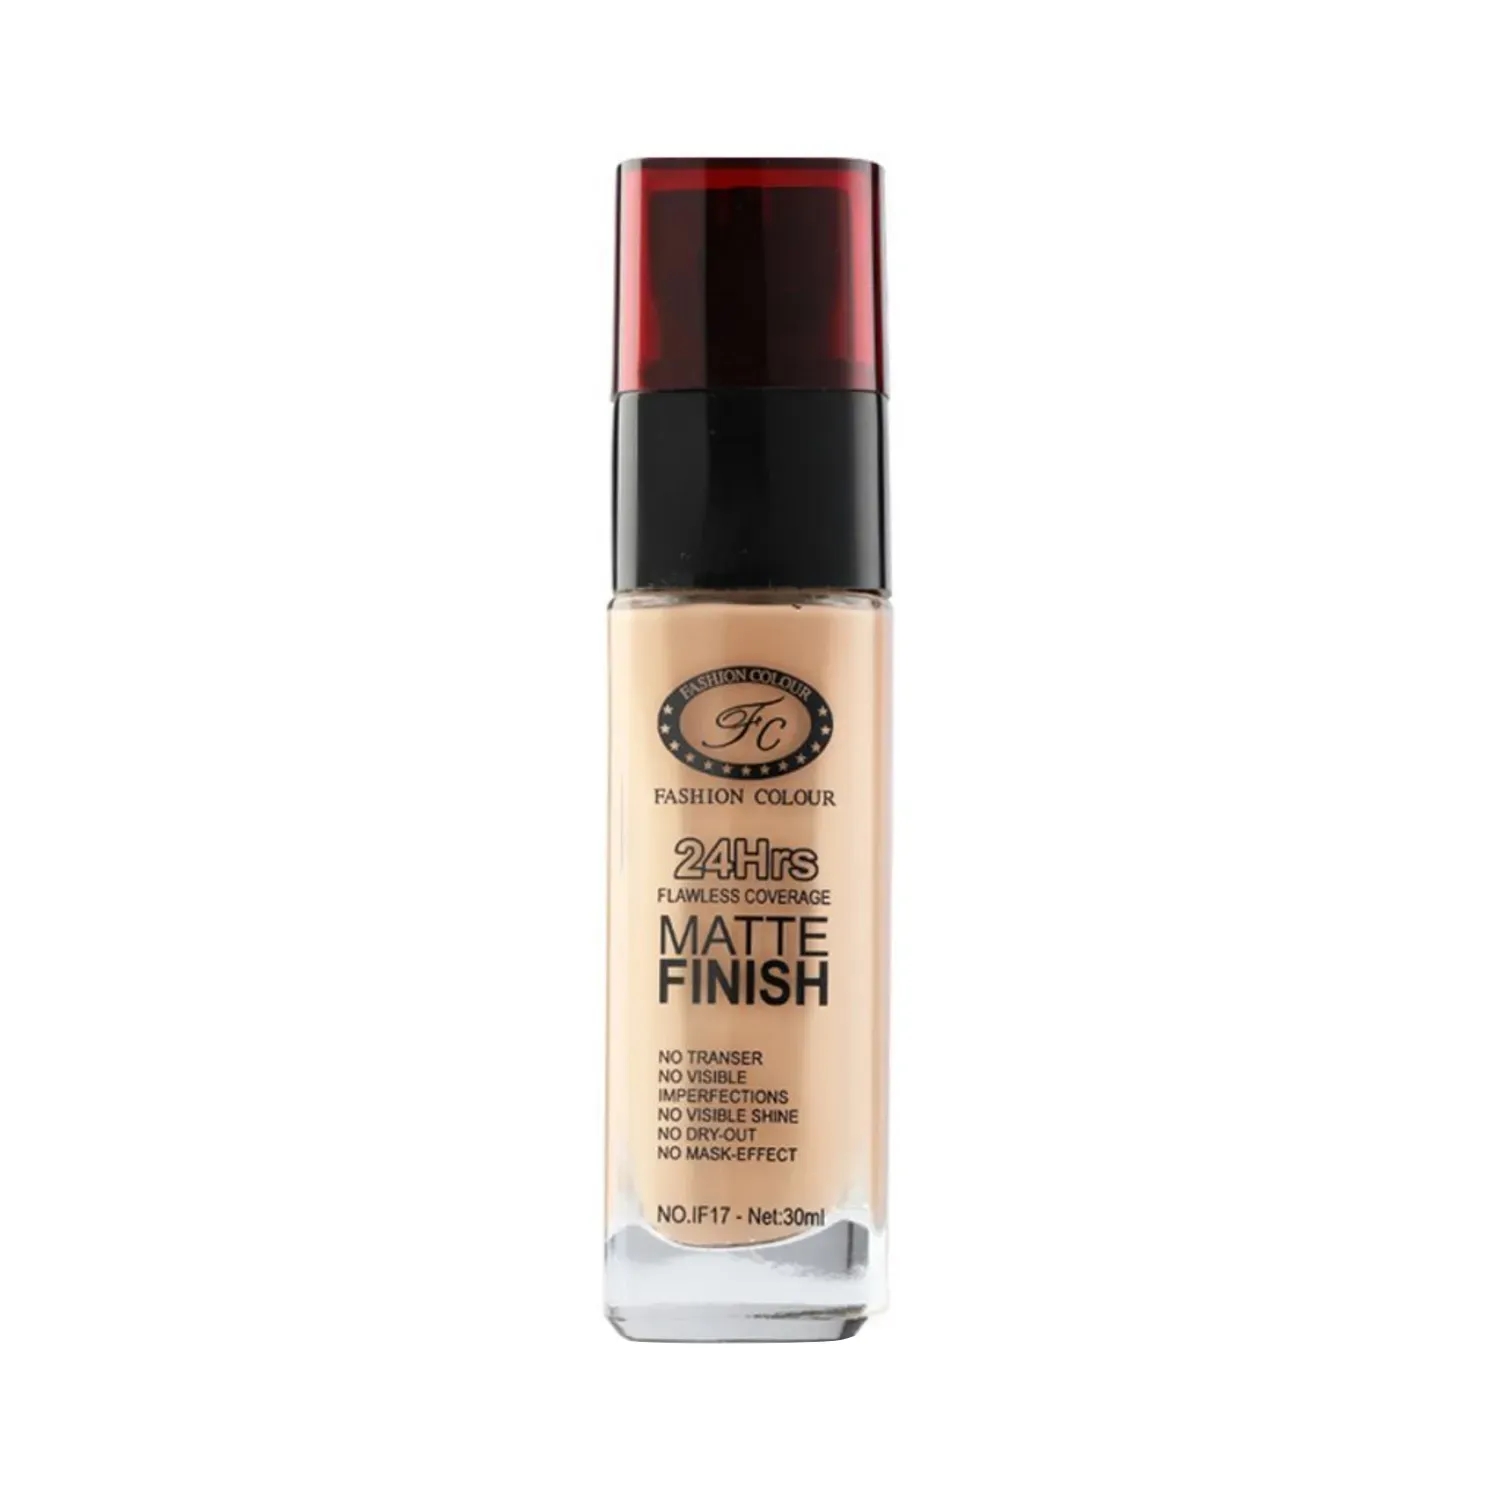 BUY Octinoxate (Flormar Smooth Touch Foundation 08 Medium Beige) 50 mg/mL  from GNH India at the best price available.